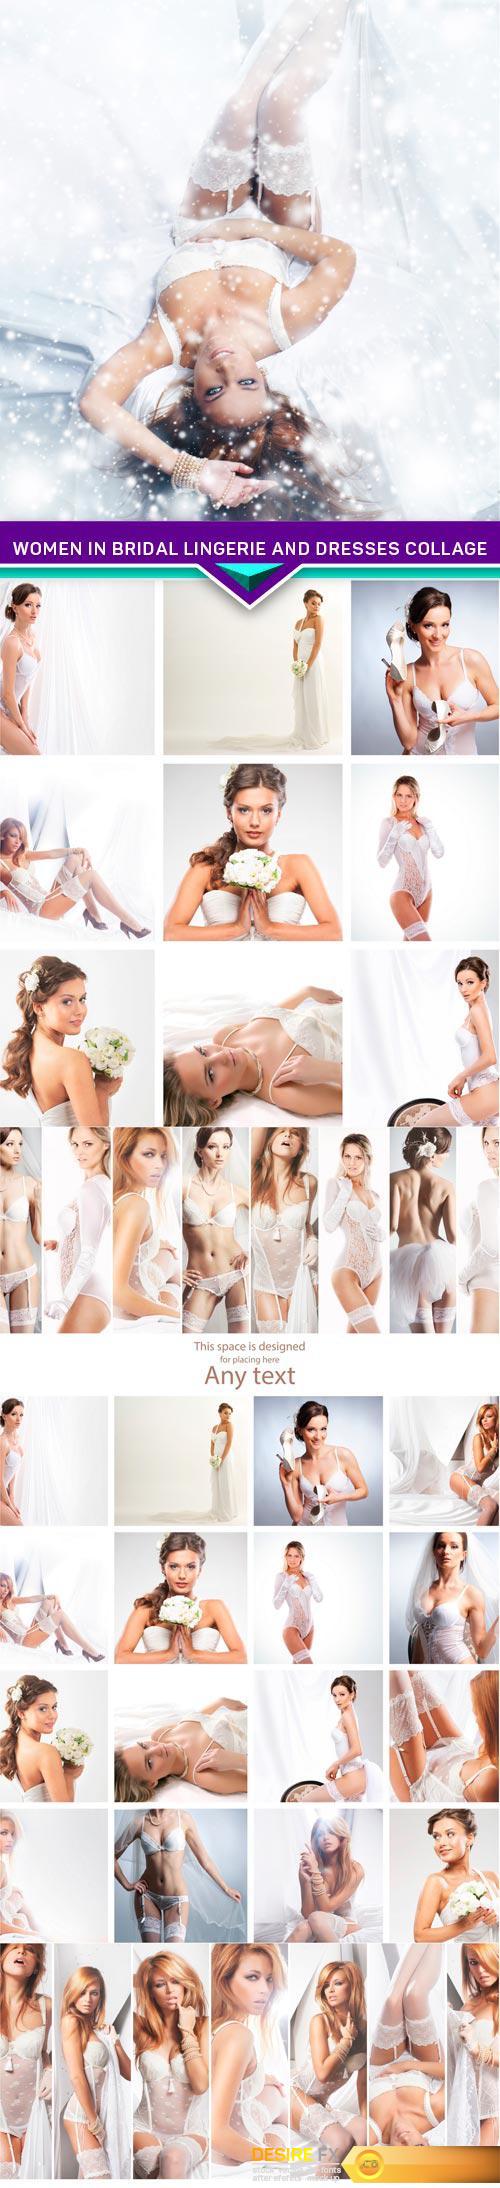 Women in bridal lingerie and dresses collage 5X JPEG